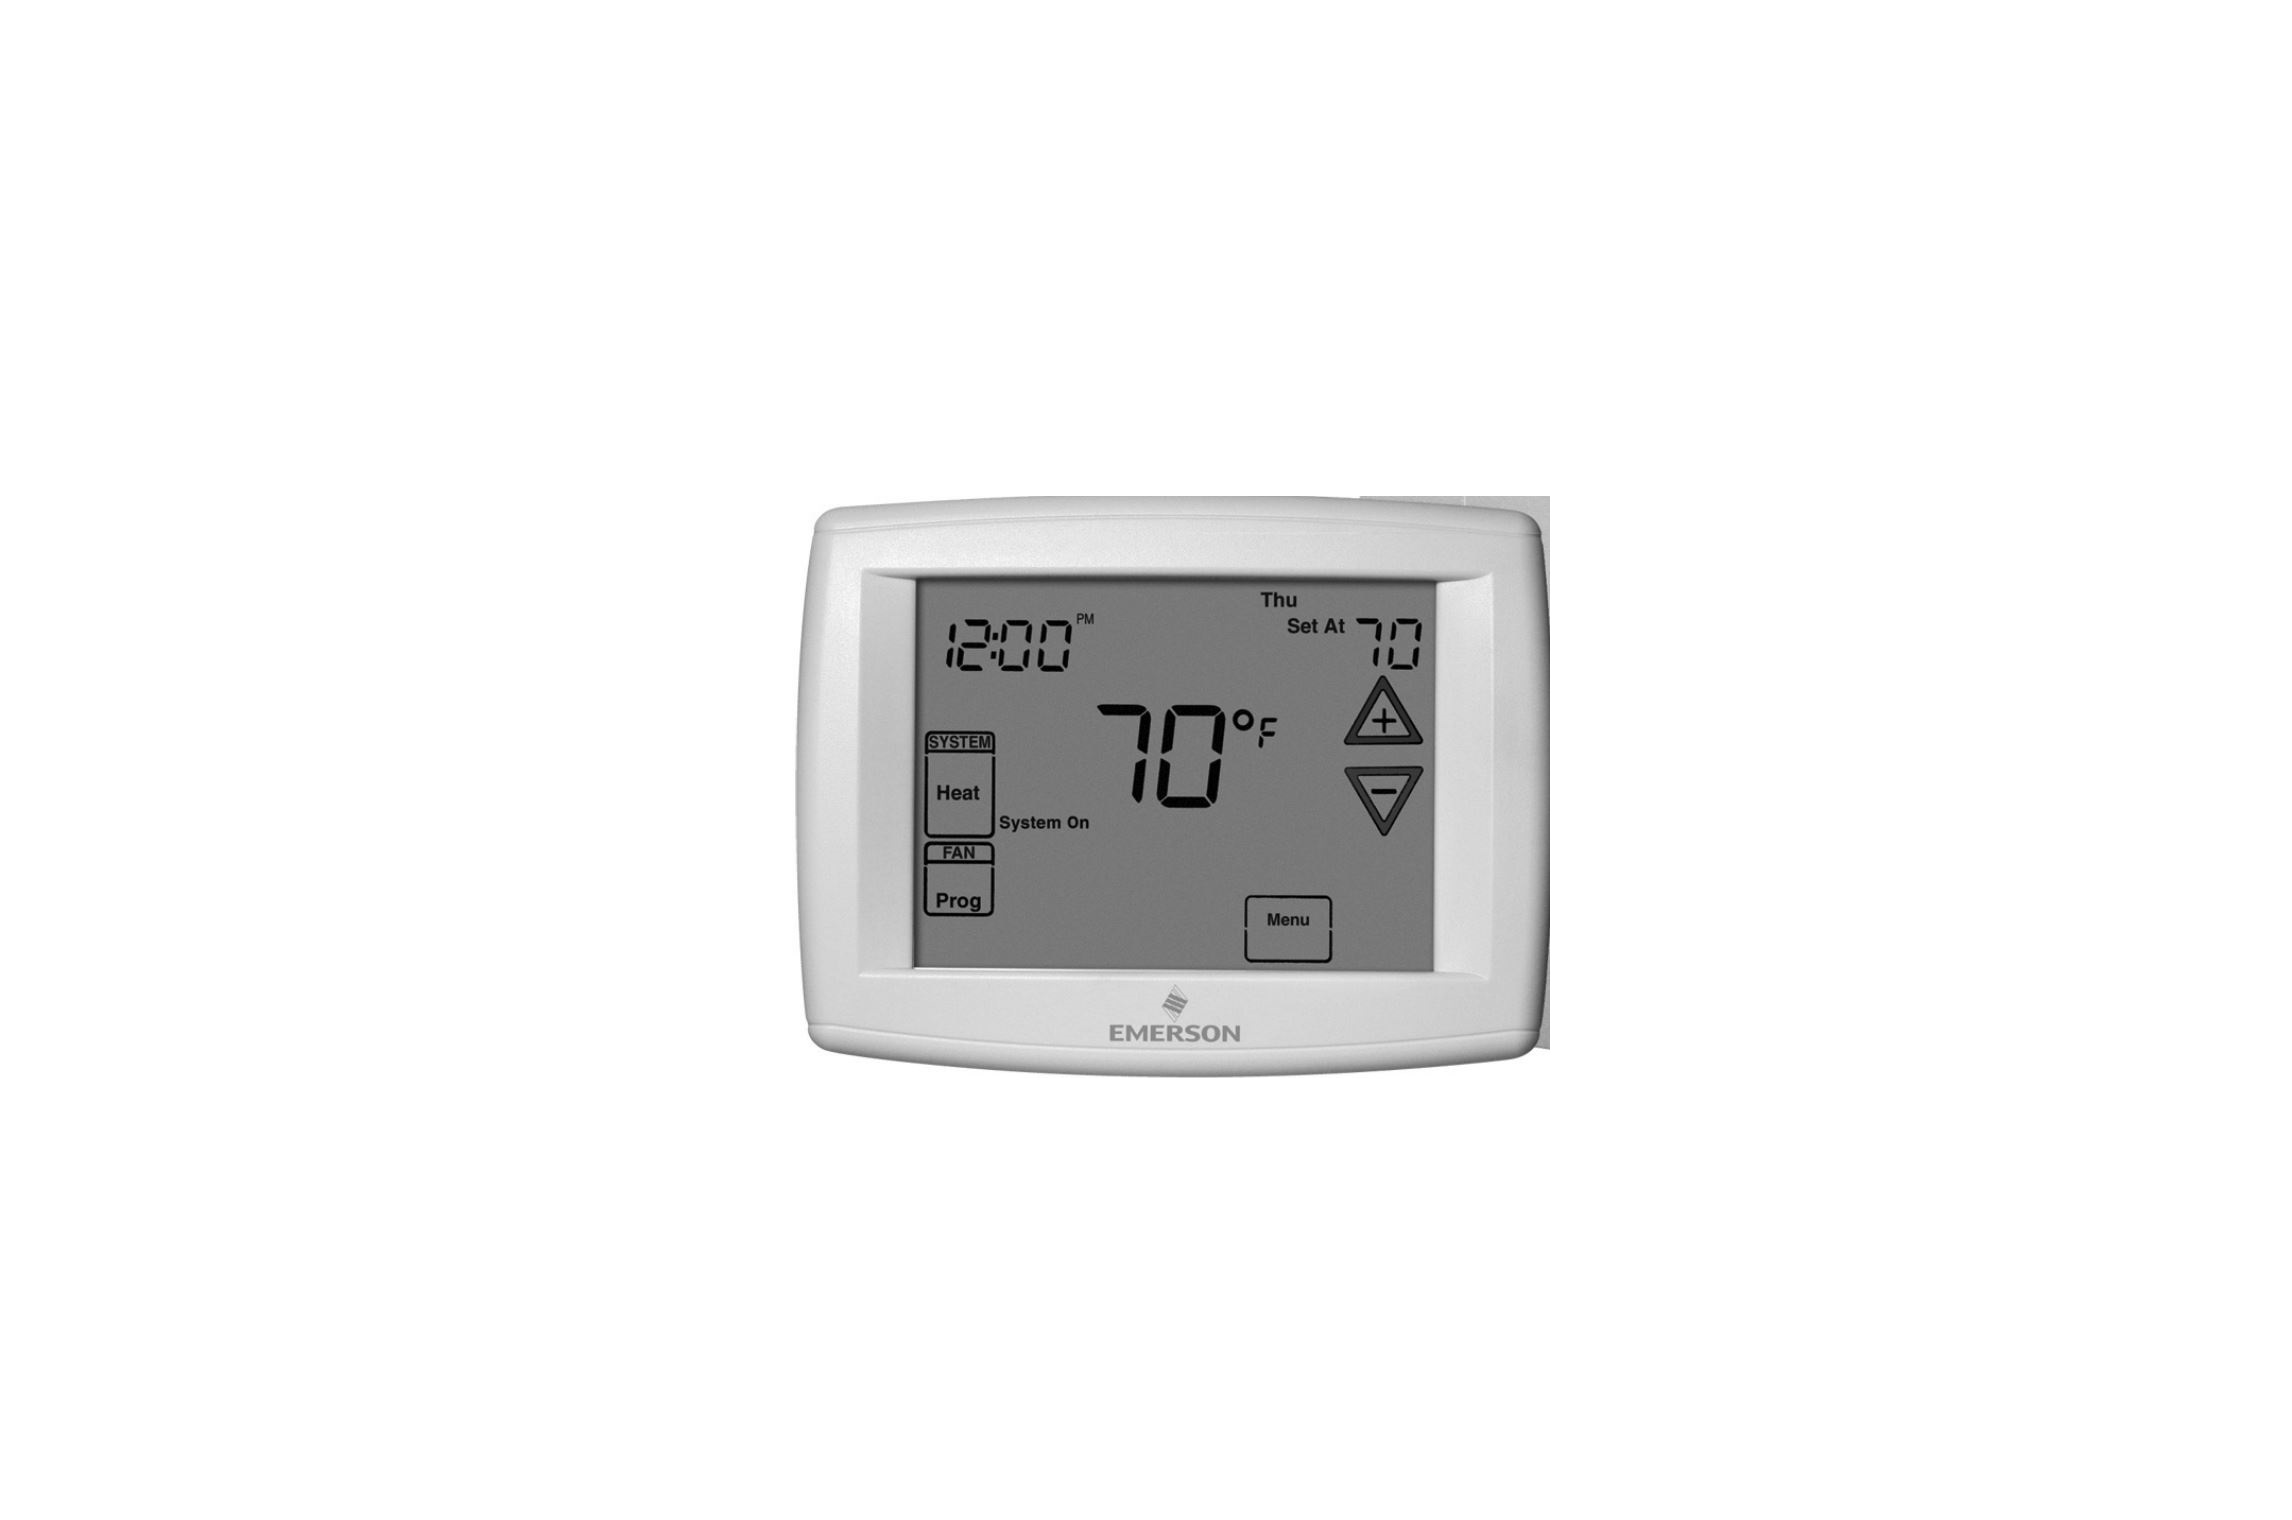 Emerson 1F98EZ-1421 Programmable Thermostat USER GUIDE